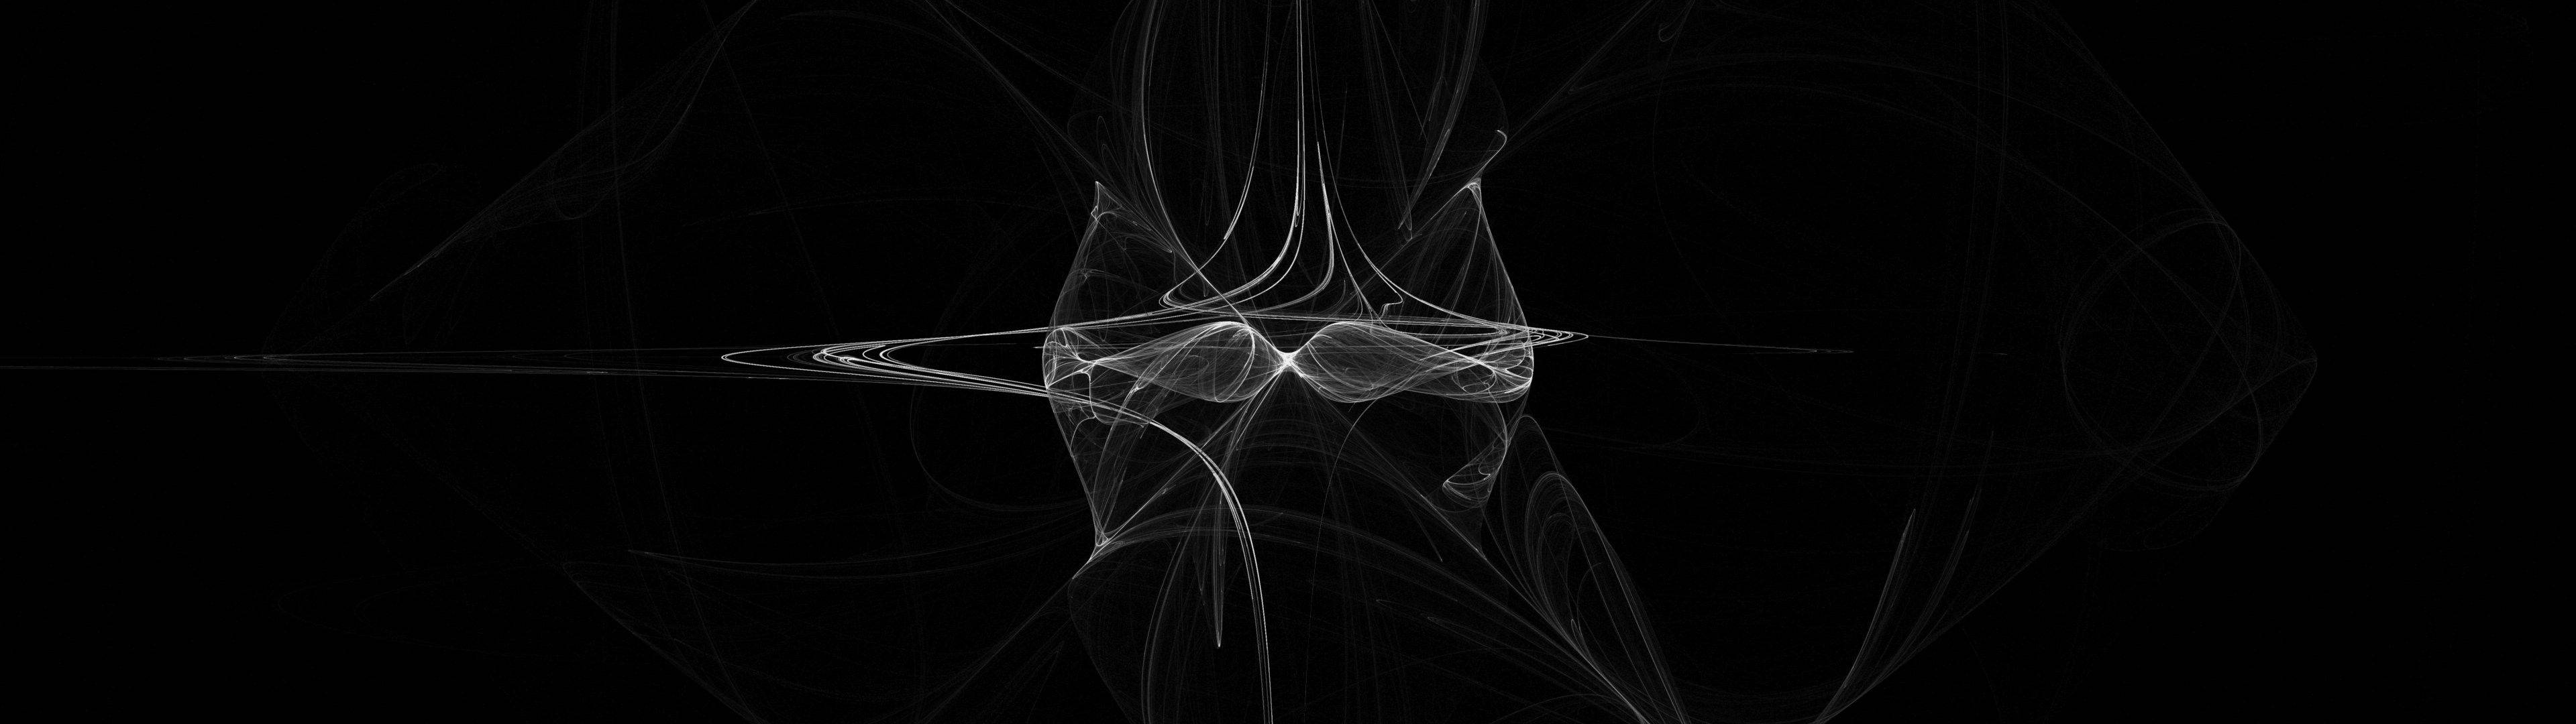 Dual Monitor Abstract Mist Lines